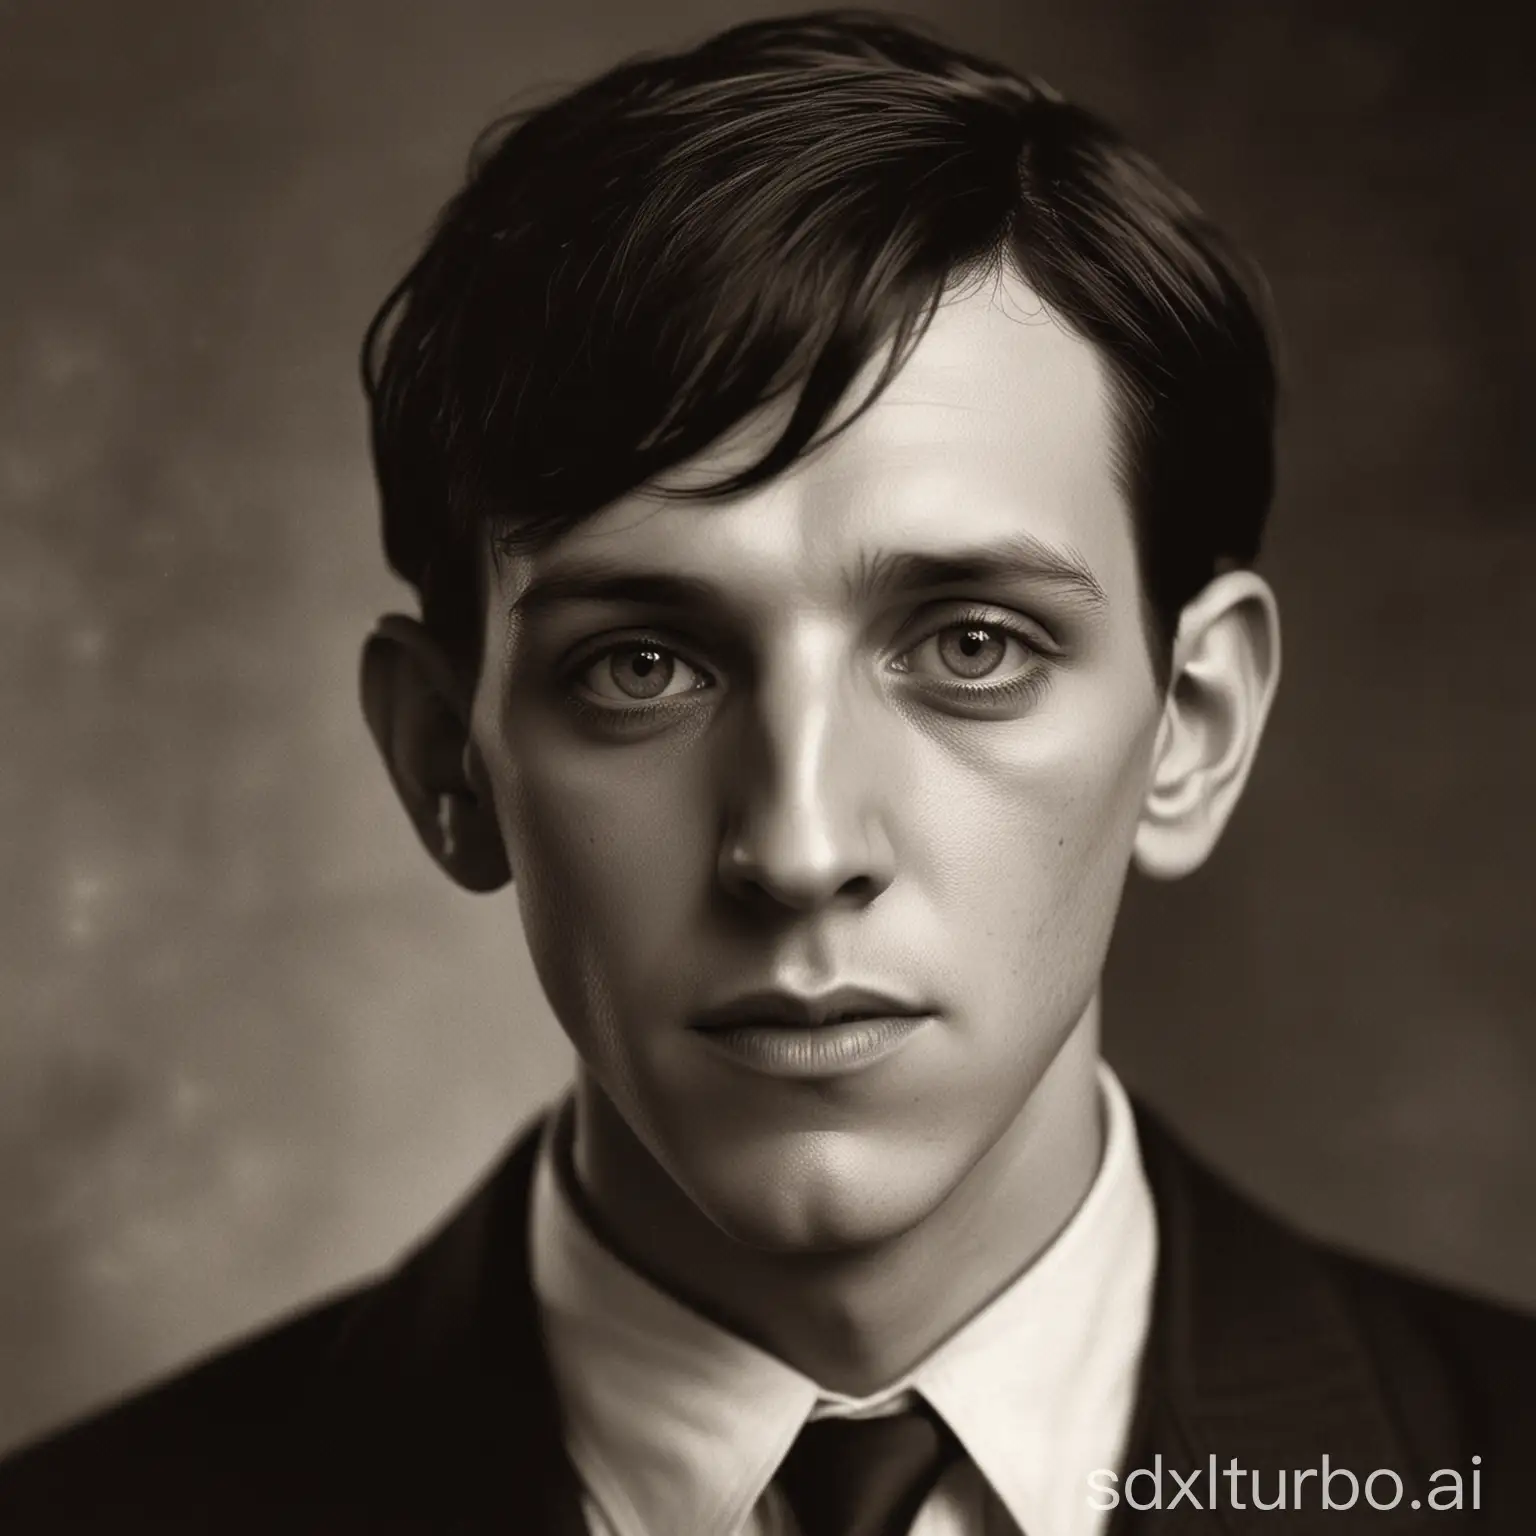 A young Howard Lovecraft with a pale, elongated face, a high forehead and piercing but melancholic eyes. He has thin lips, angular features and dark hair combed back. He is writing a book with his head slightly turned.